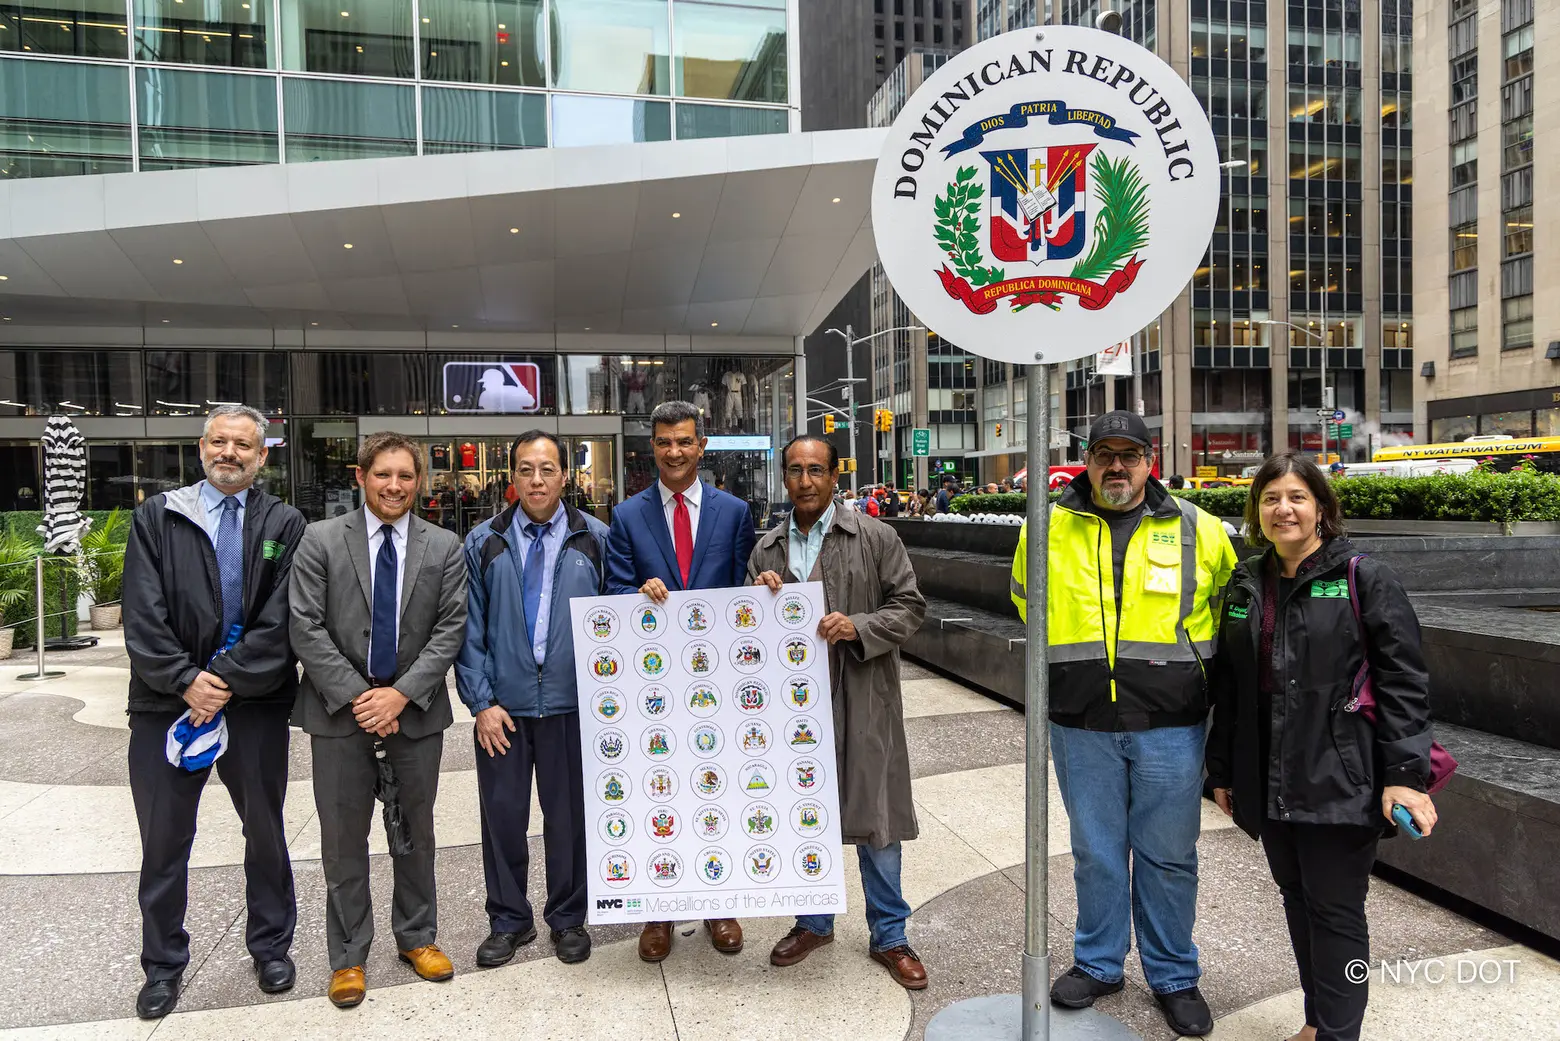 NYC completes restoration of national medallions along Avenue of the Americas